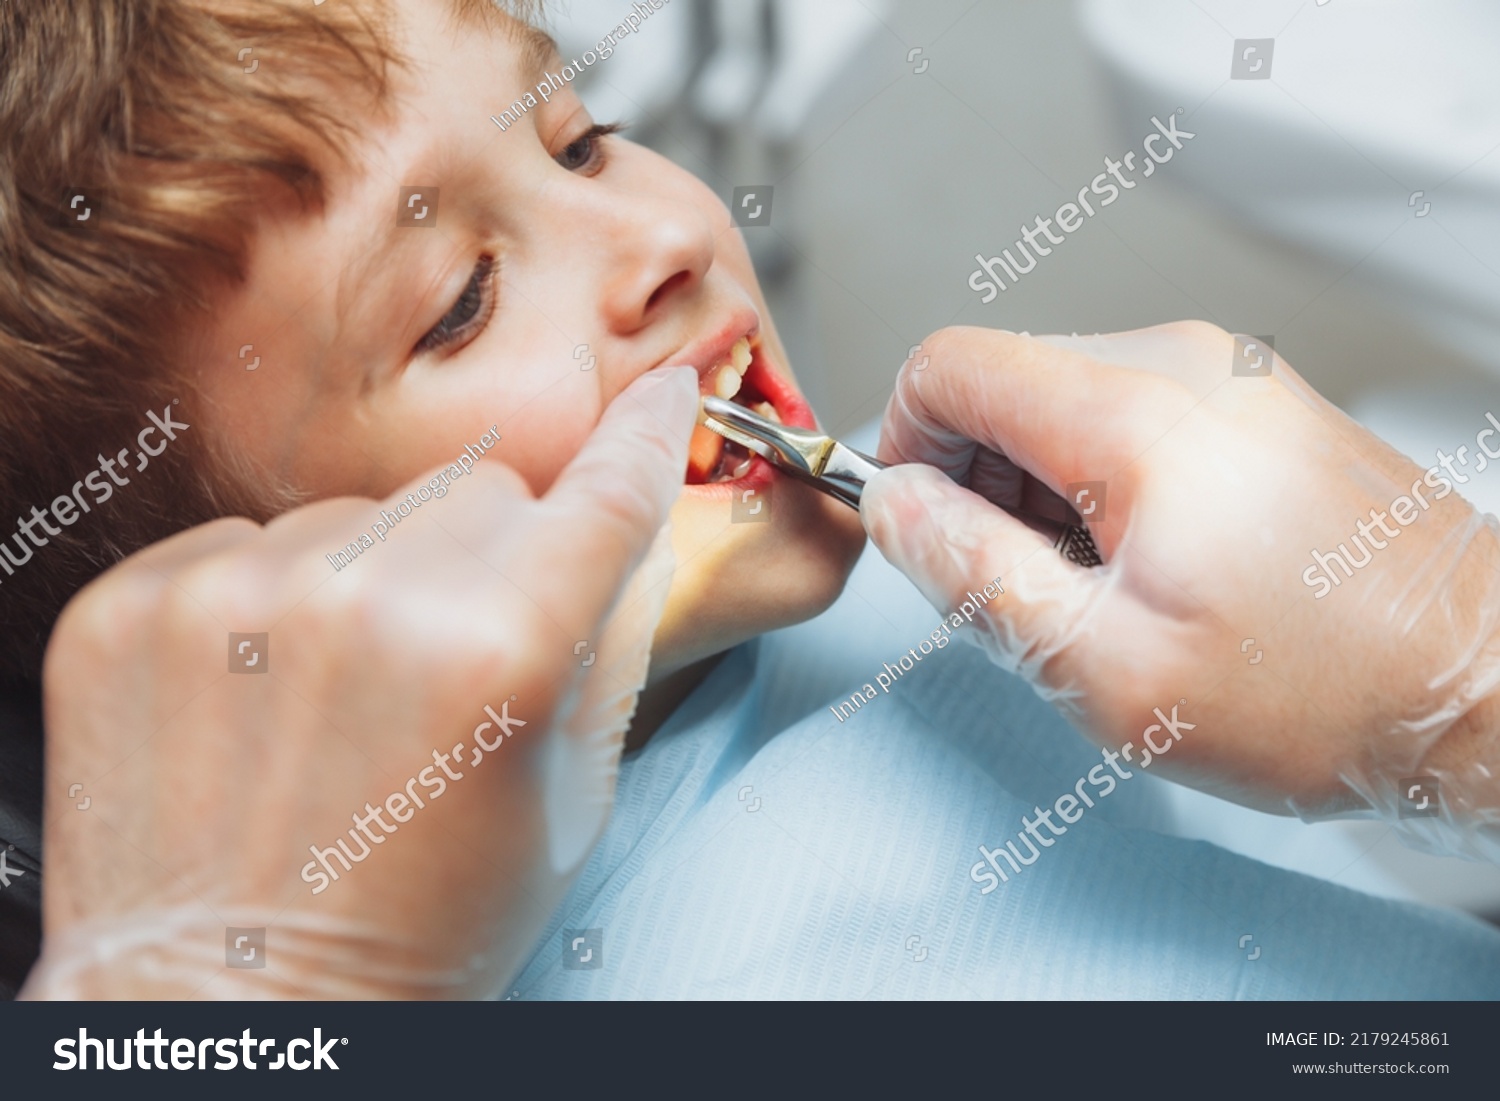 Portrait of a child patient and the hands of a pediatric dentist with dental forceps, close-up. painless extraction of teeth. pediatric dentistry. #2179245861